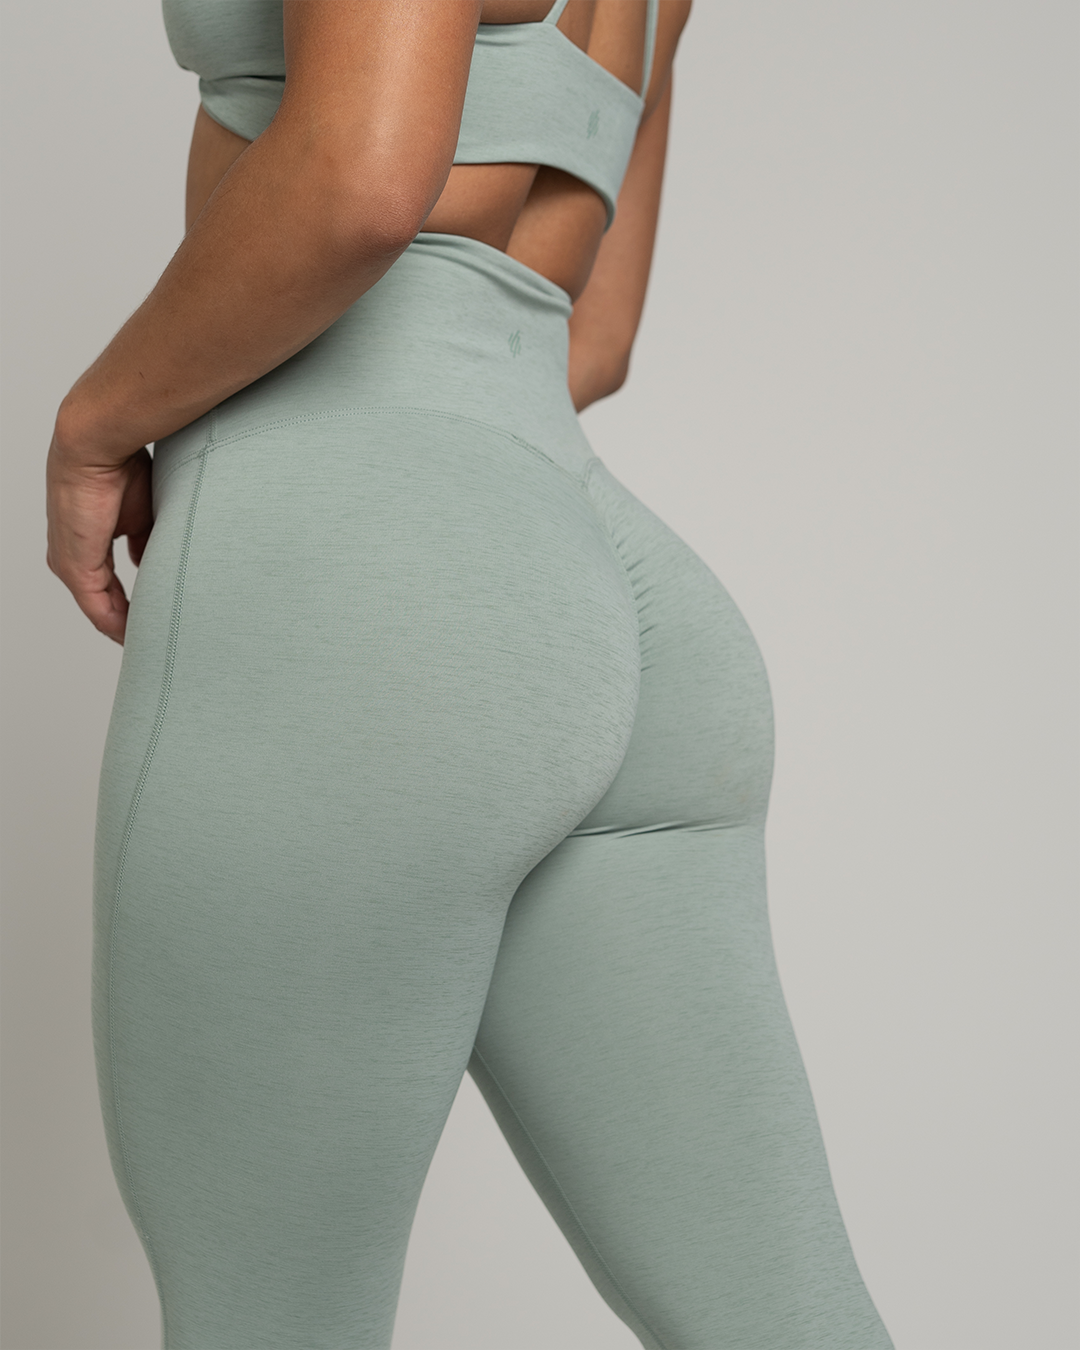 SKIN is back ✨hey LC Girl, we have restocked our most in demand collection  featuring our famous scrunch bum leggings & even added 2 dre